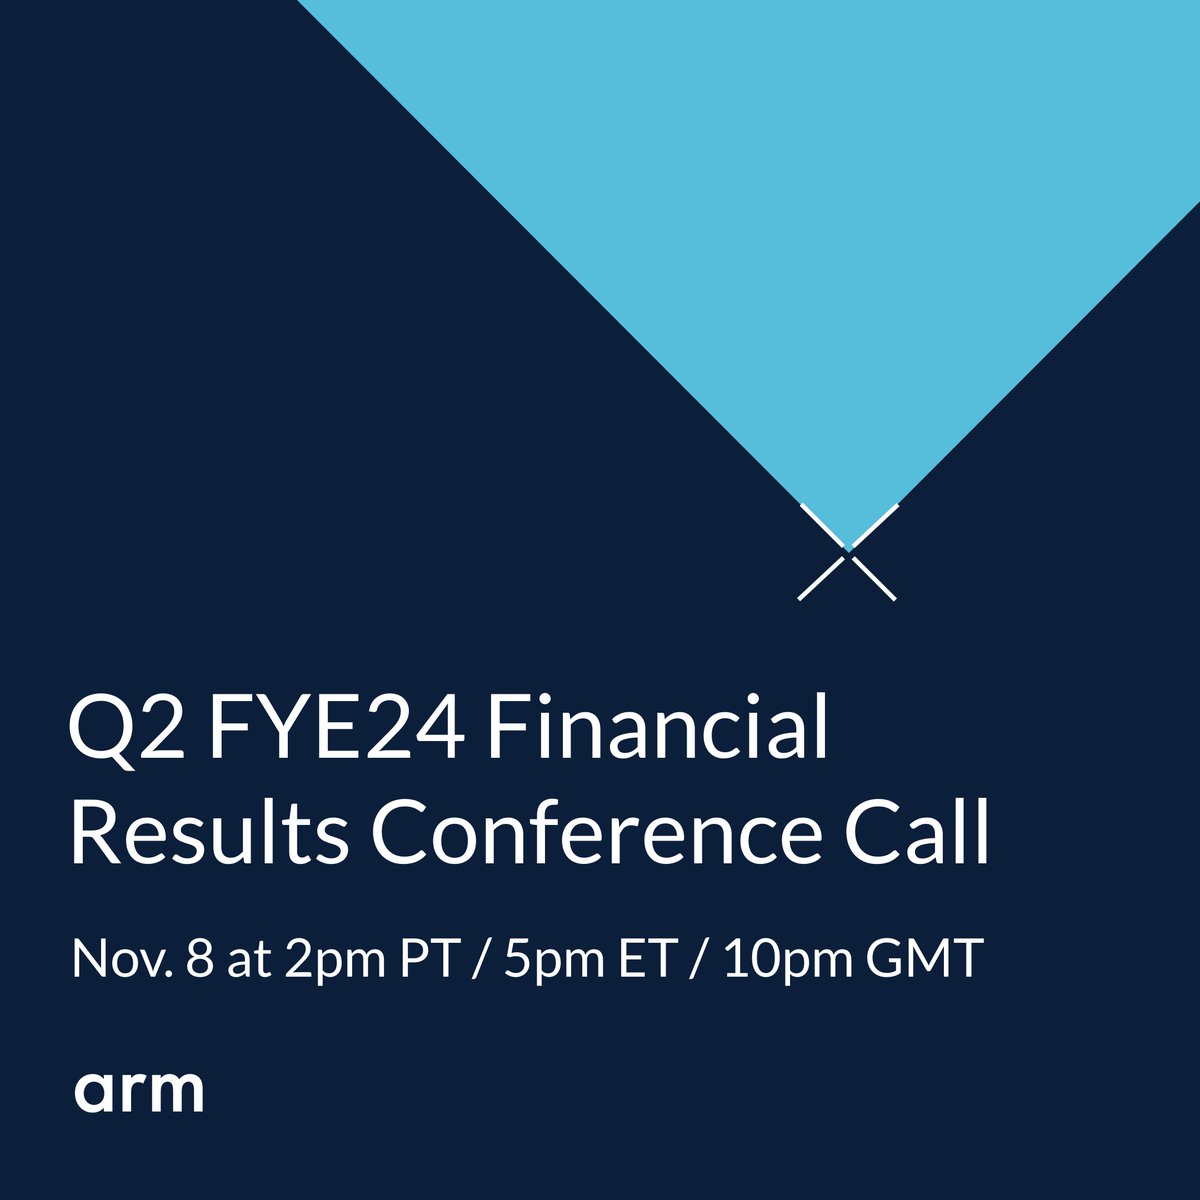 📣 Tune in on Nov. 8 for our financial results conference call where we’ll discuss our Q2 FYE24 financial results and business outlook: bit.ly/3QFJKVB